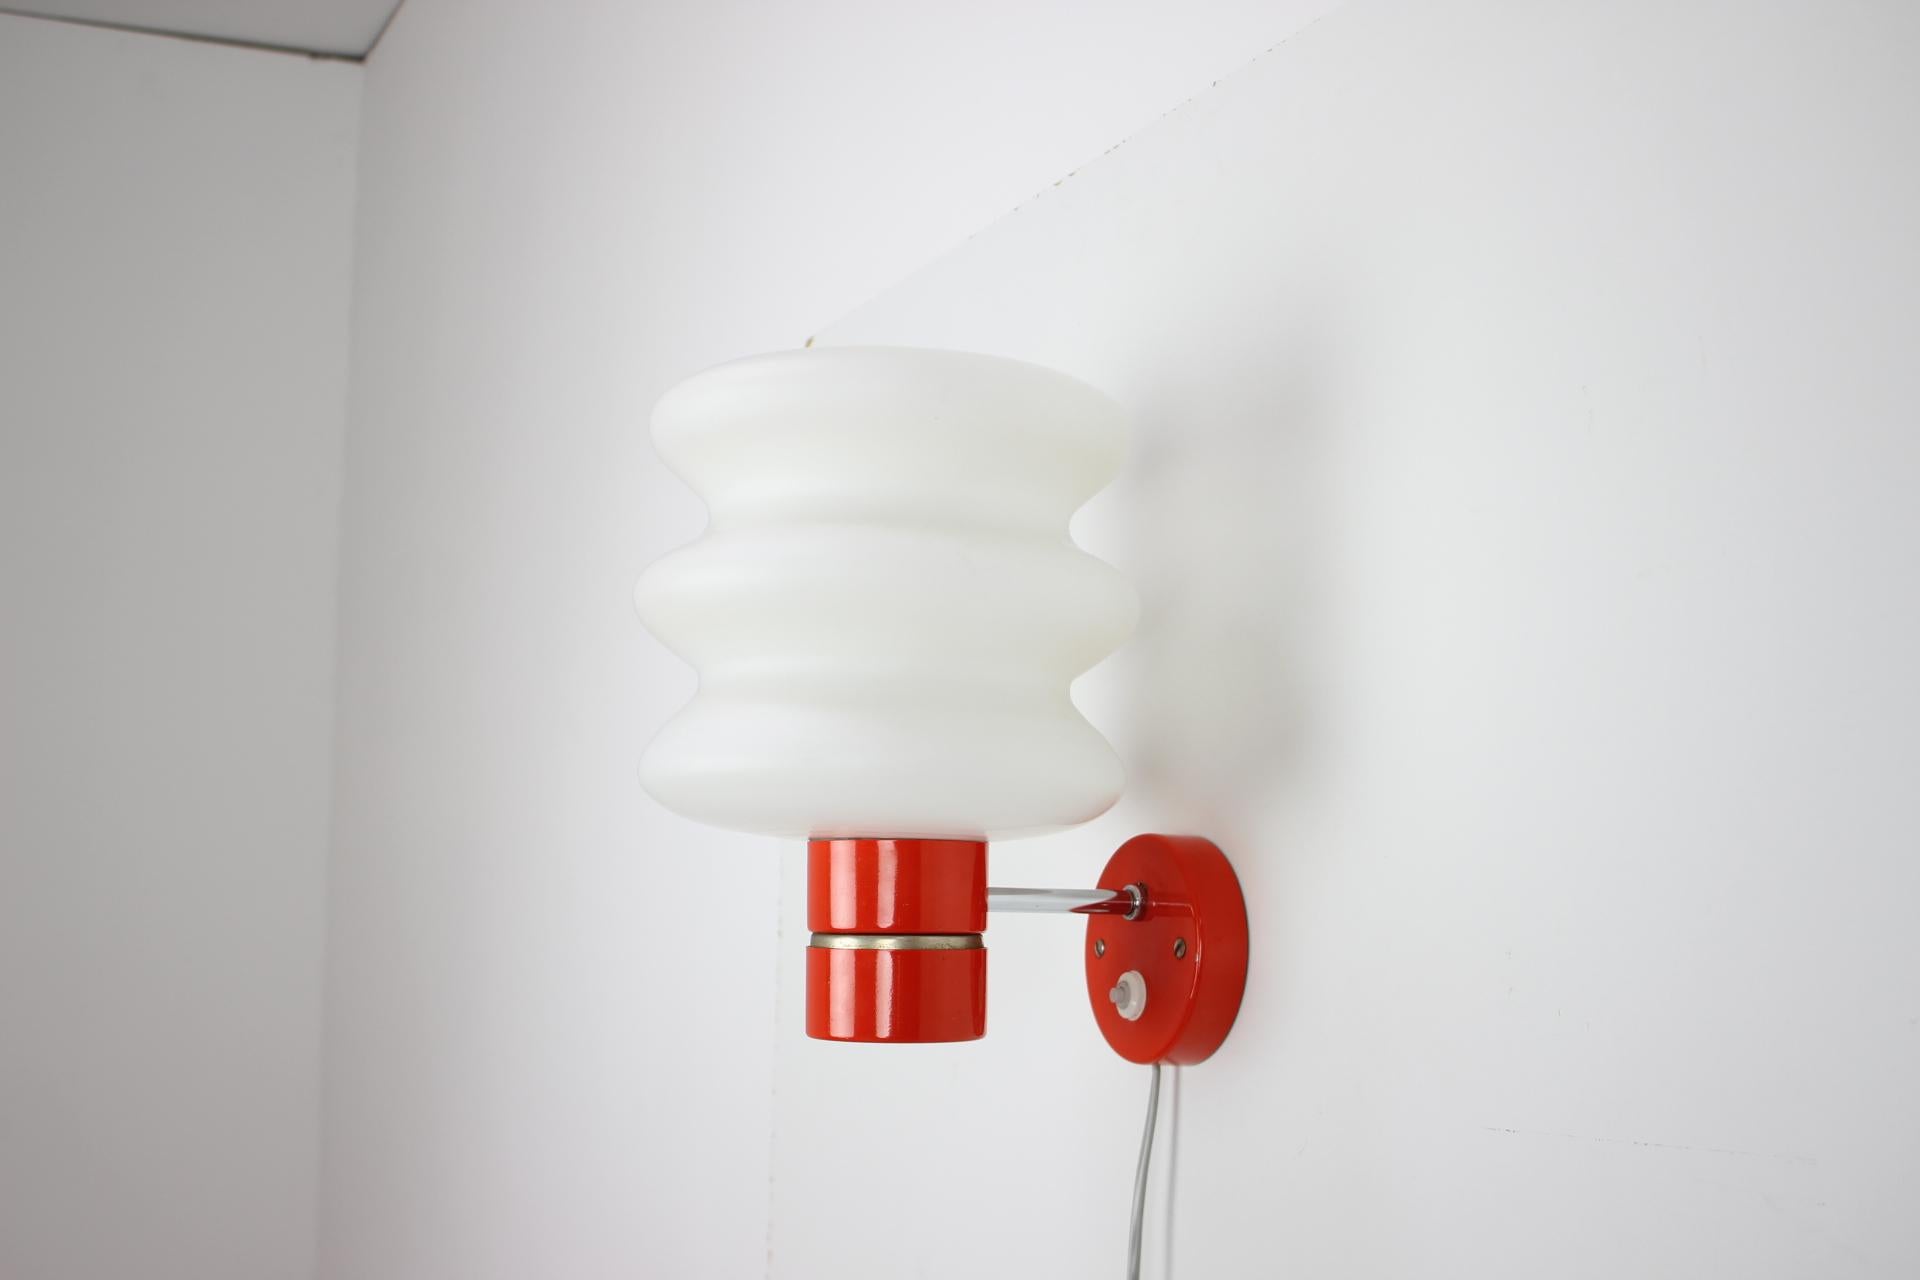 Beautiful wall lamp in Space Age style. Original good condition. Made in Czechoslovakia in 1970s by Napako. 220V, E27.